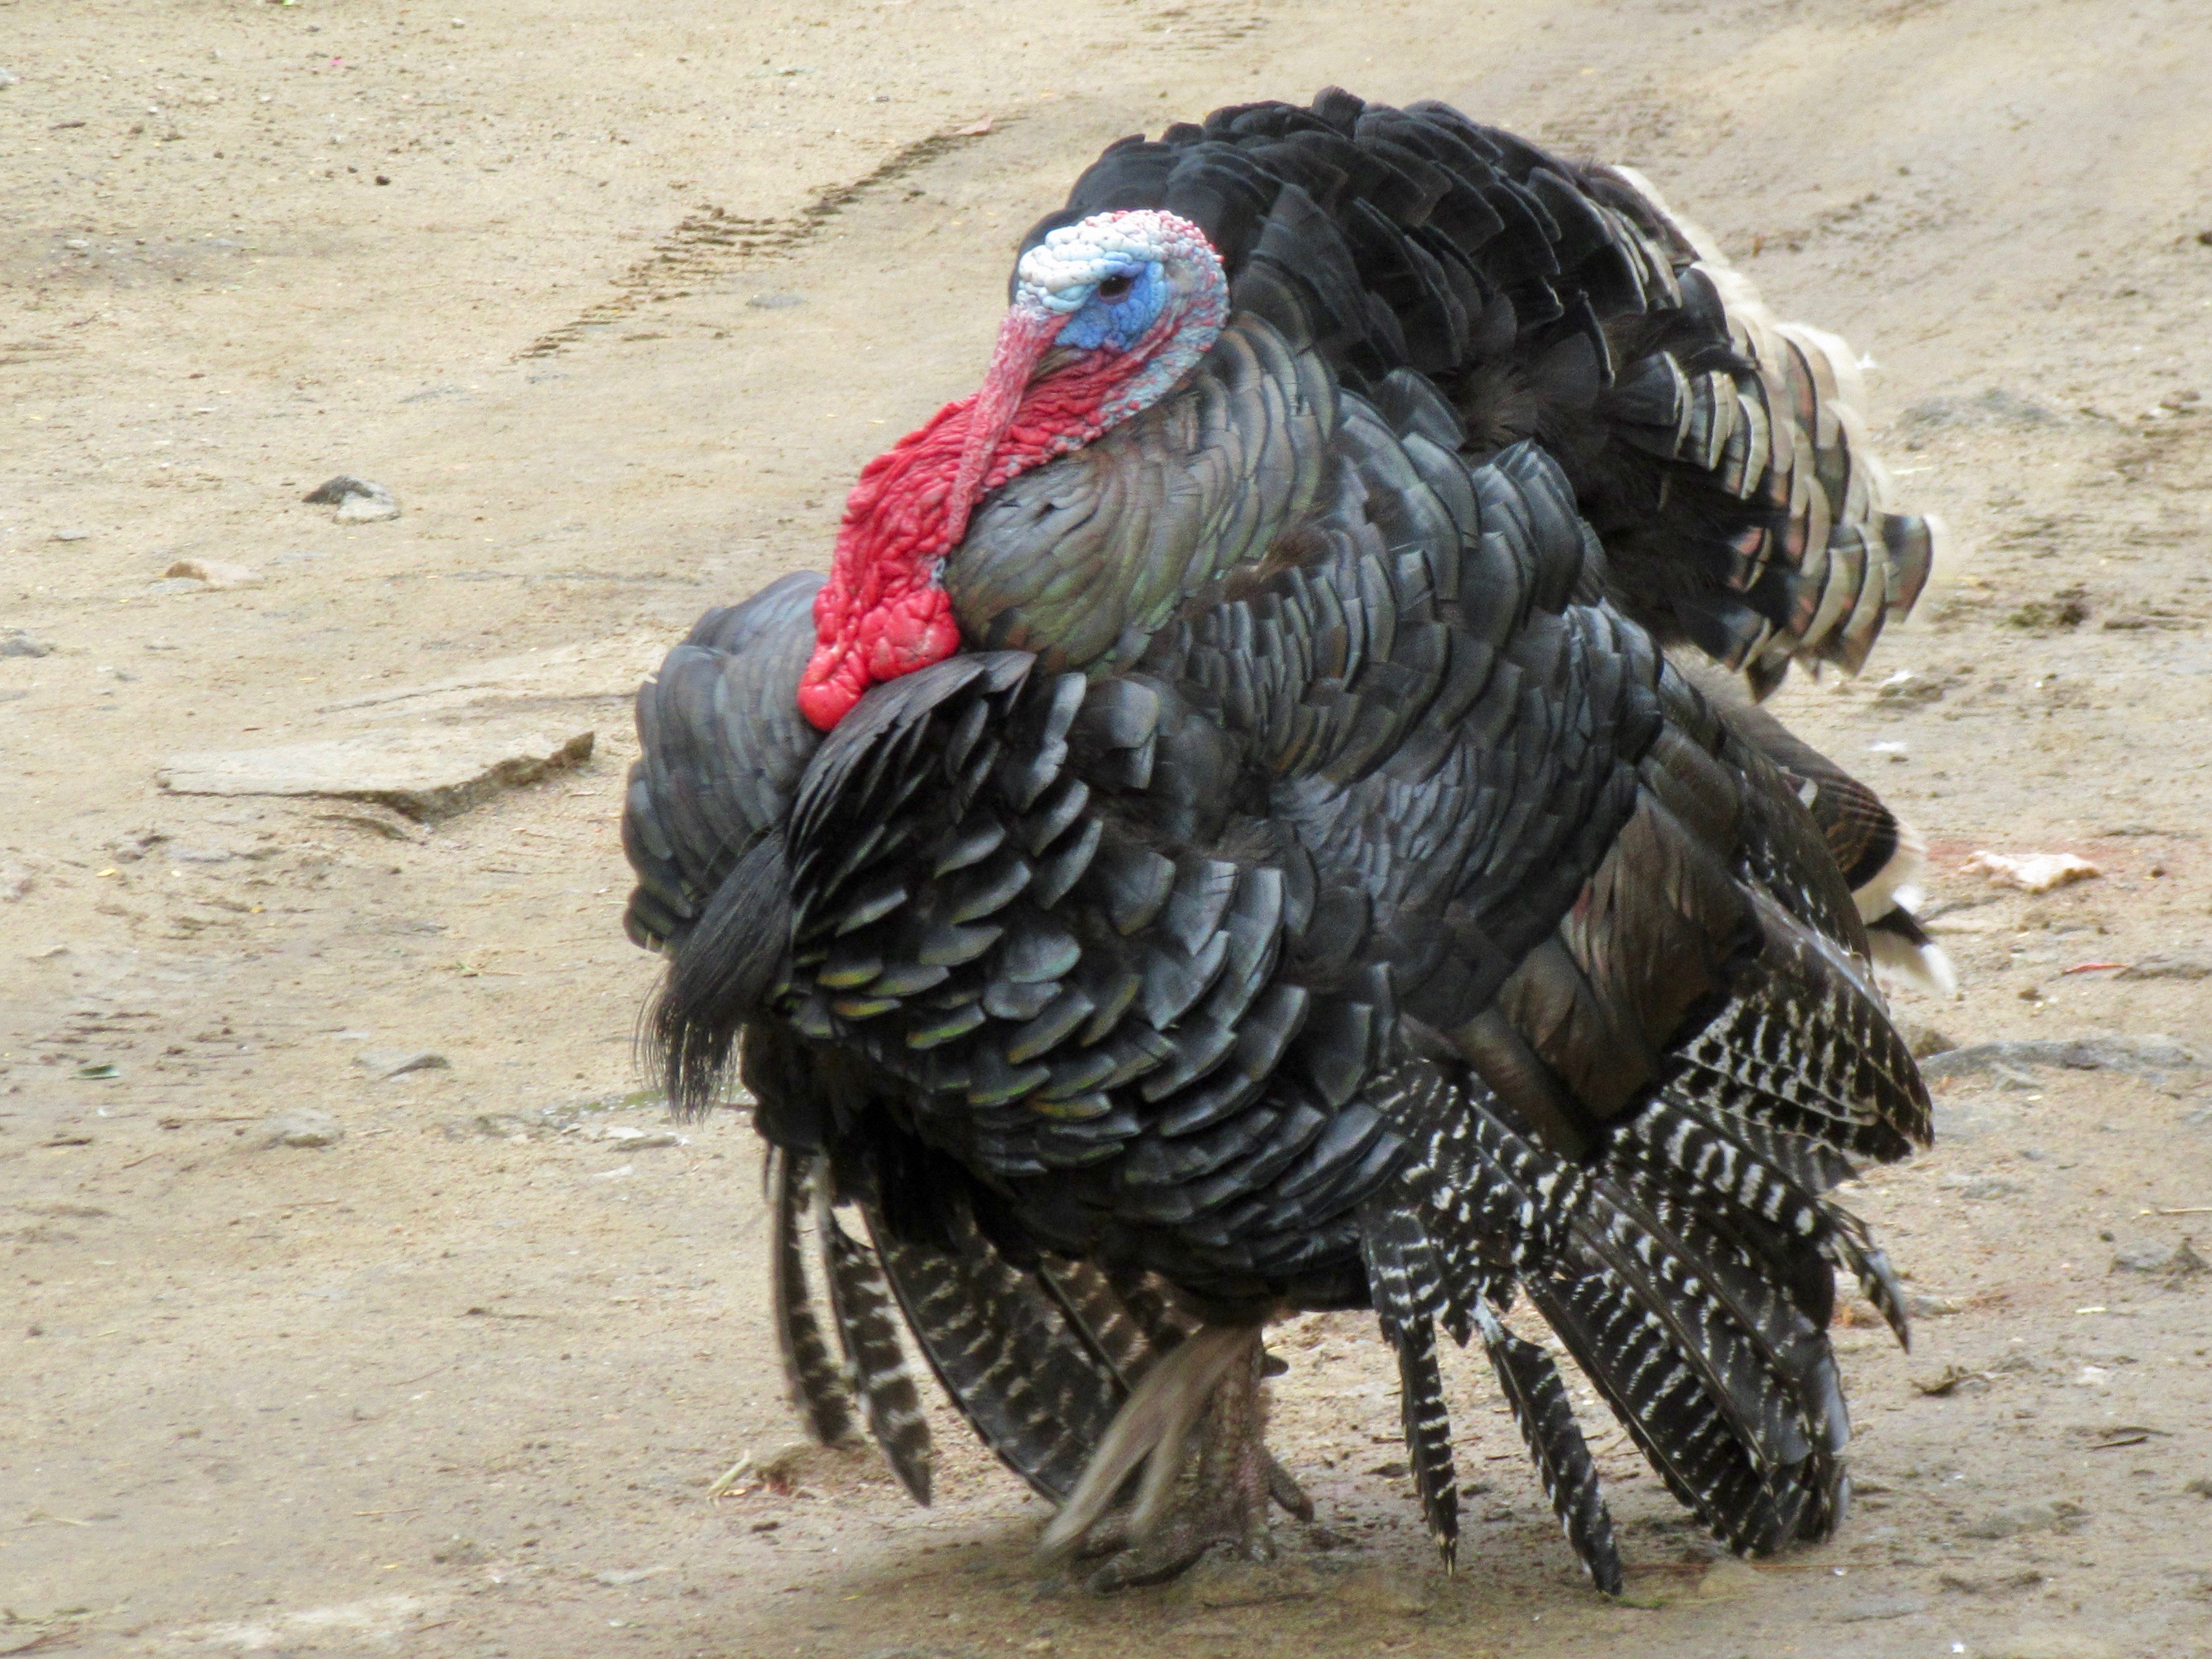 A domesticated turkey in full glory. It is a very large bird in all dimensions, shaped almost like a ball of black feathers. They have tiny heads with pink skin that extends down to their necks. This one's fluffed up all its feathers and fanned out its tail to display for me and my camera.
